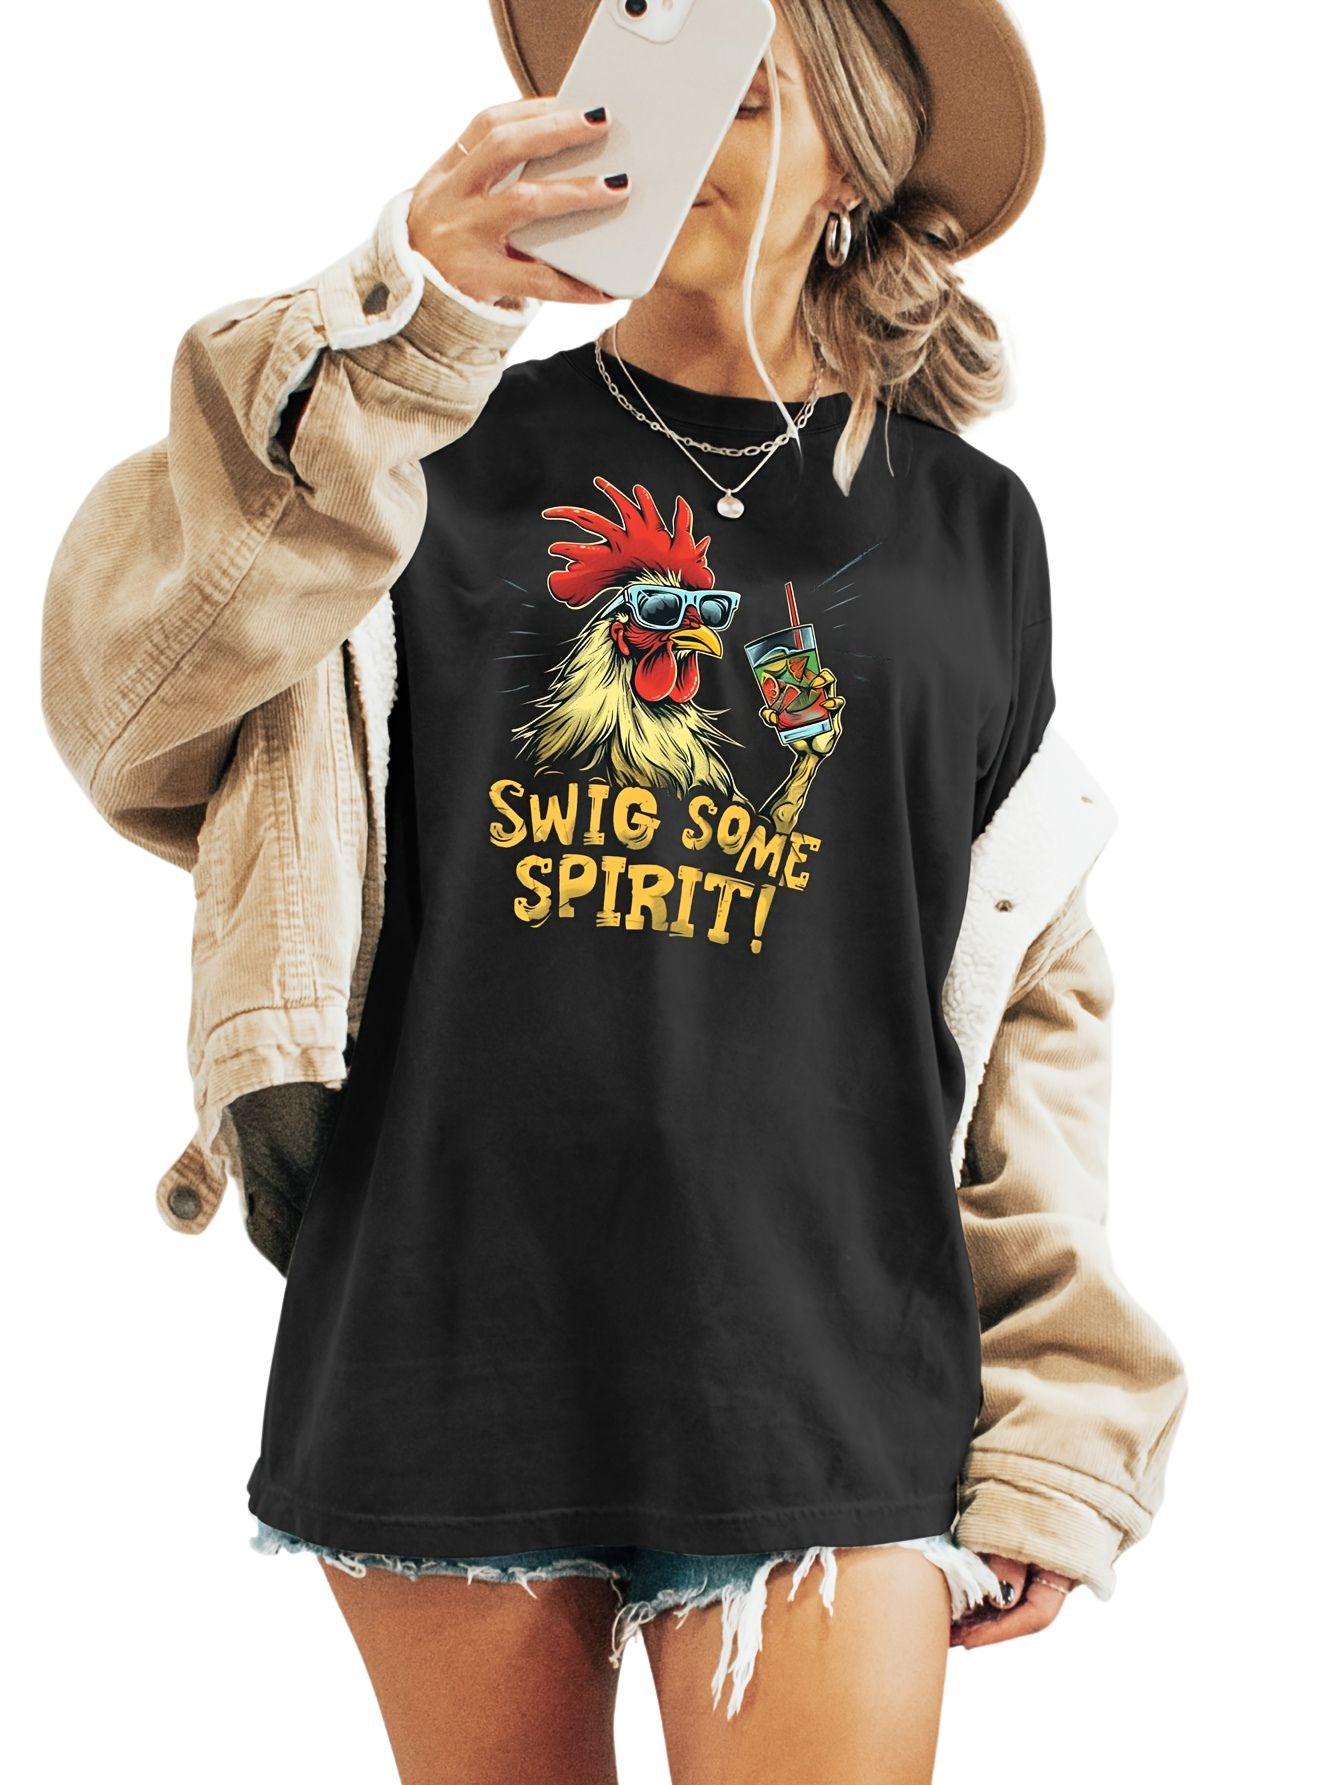 Chicken Print T-shirt, Short Sleeve Crew Neck Casual Top For Summer & Spring, Women's Clothing